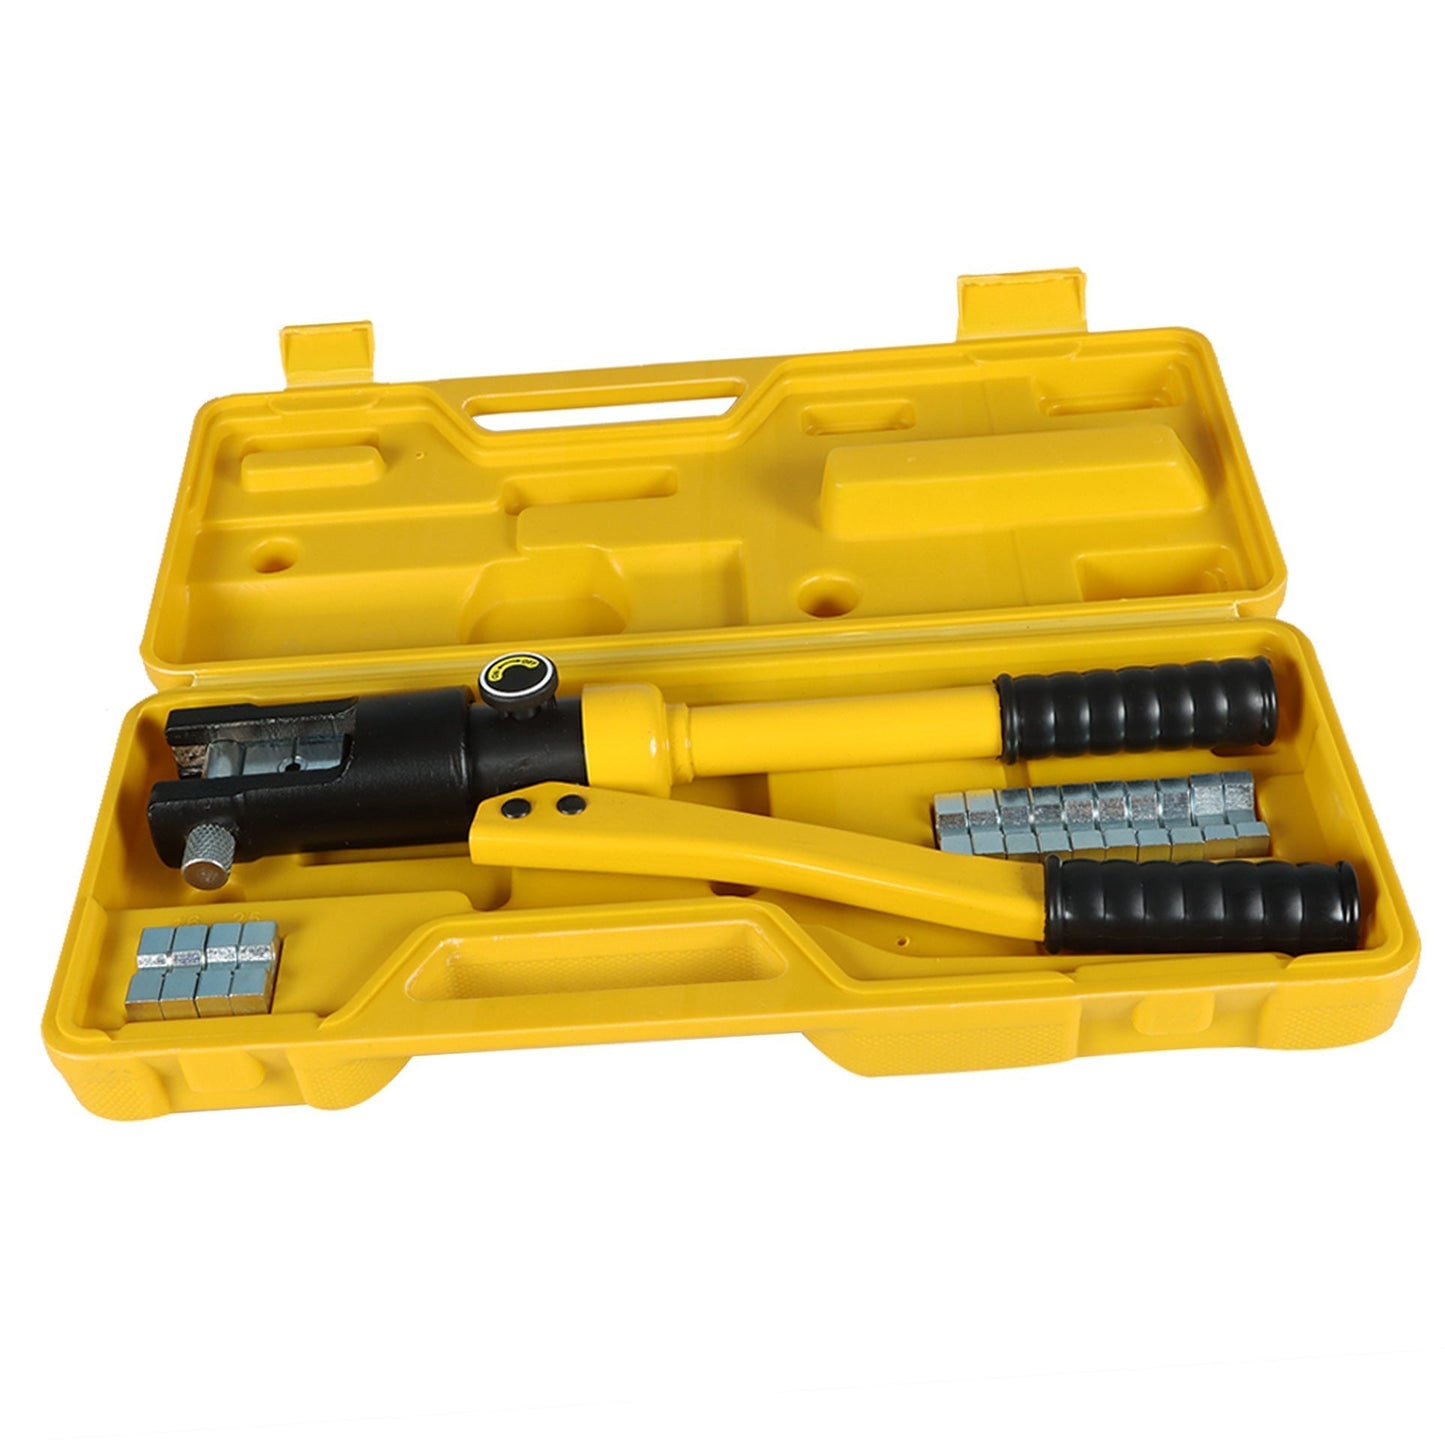 findmall 12 Ton Hydraulic Wire Crimper Battery Lug Terminal Cable Crimping Tool W/8 Dies FINDMALLPARTS